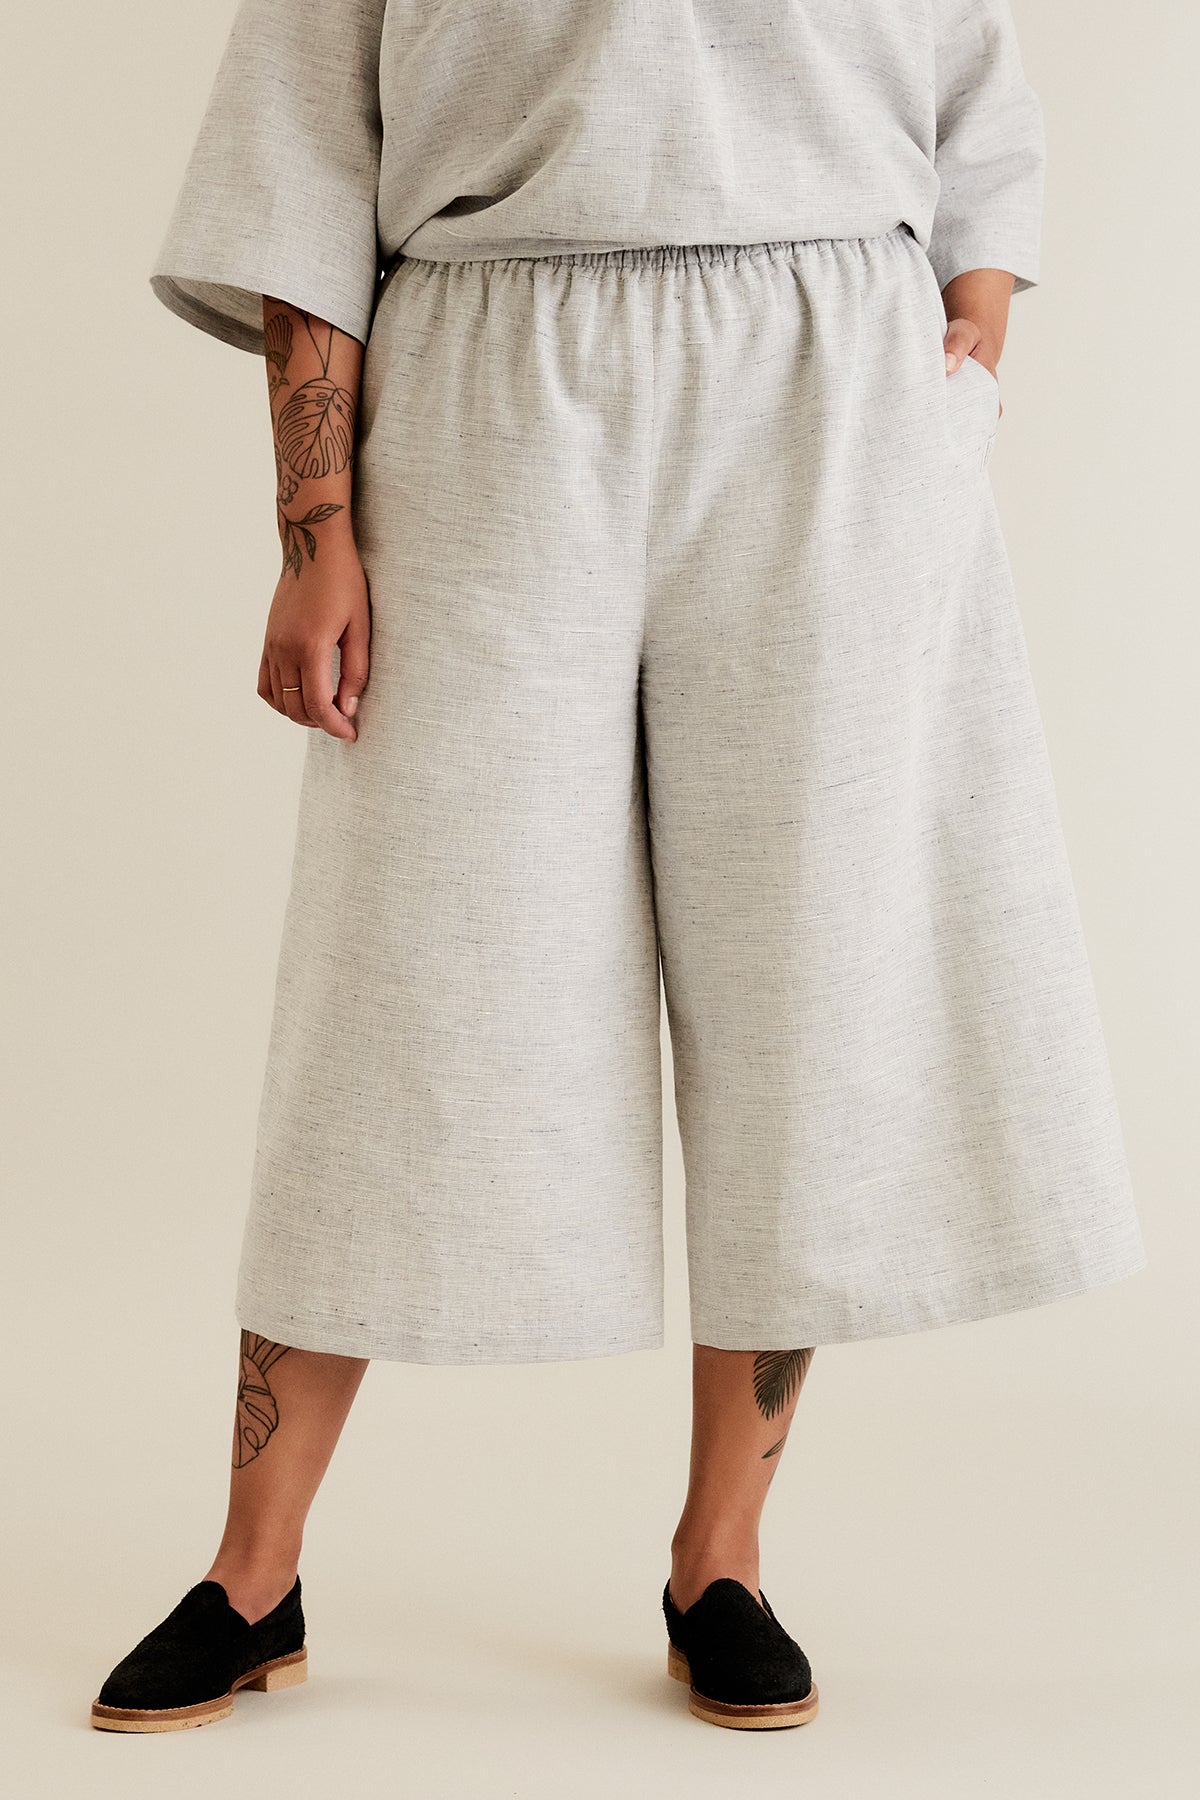 At Ease Culottes